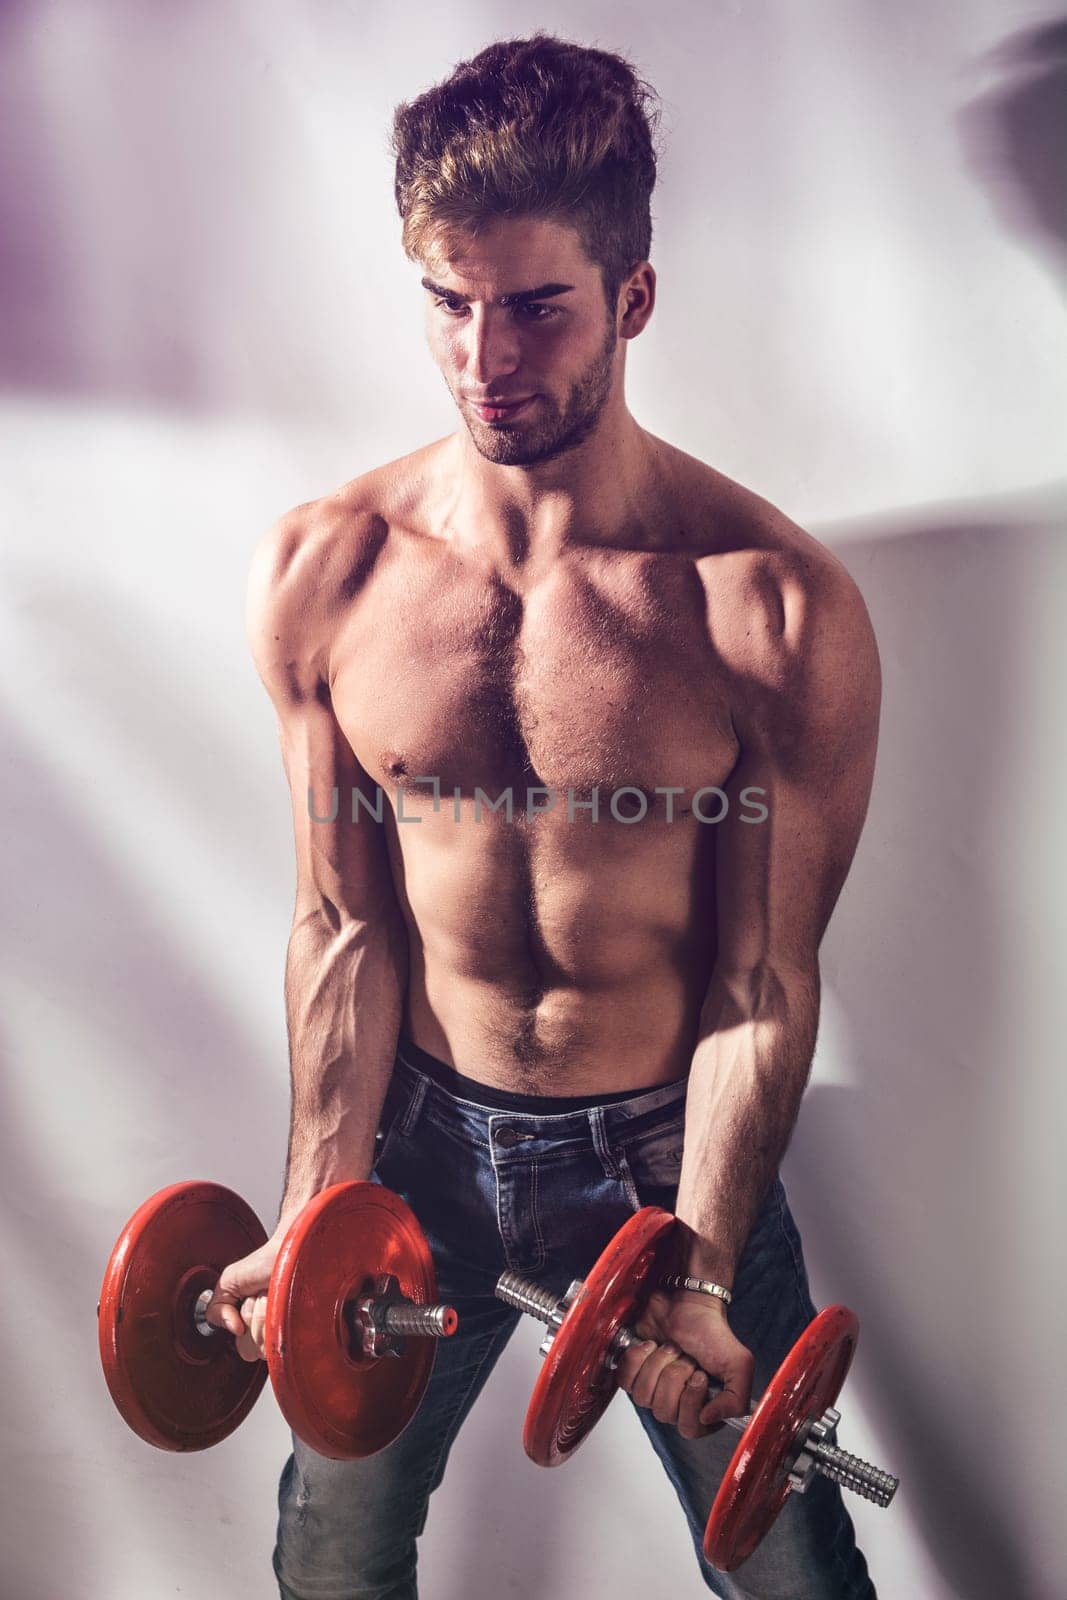 Photo of a shirtless man showcasing his strength with two vibrant red dumbbells by artofphoto